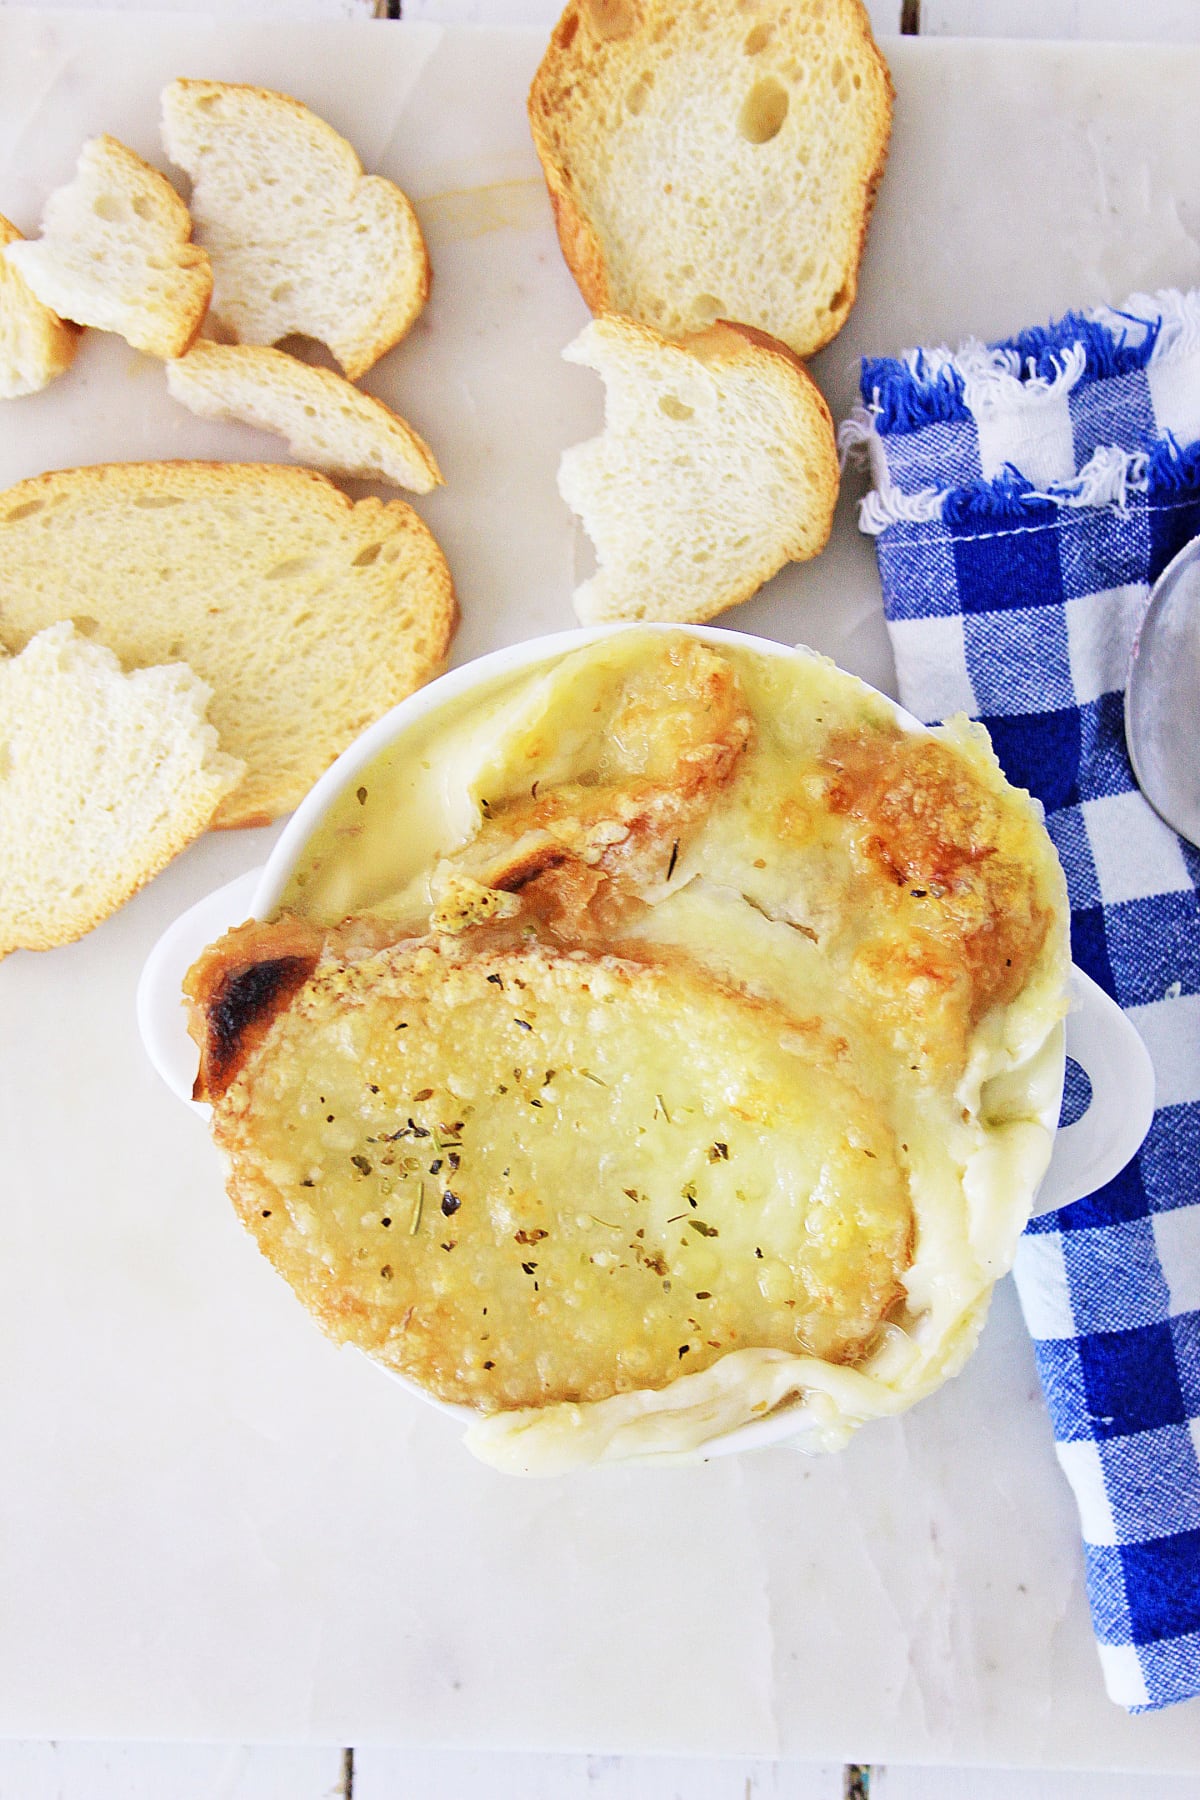 French onion soup with crusty bread